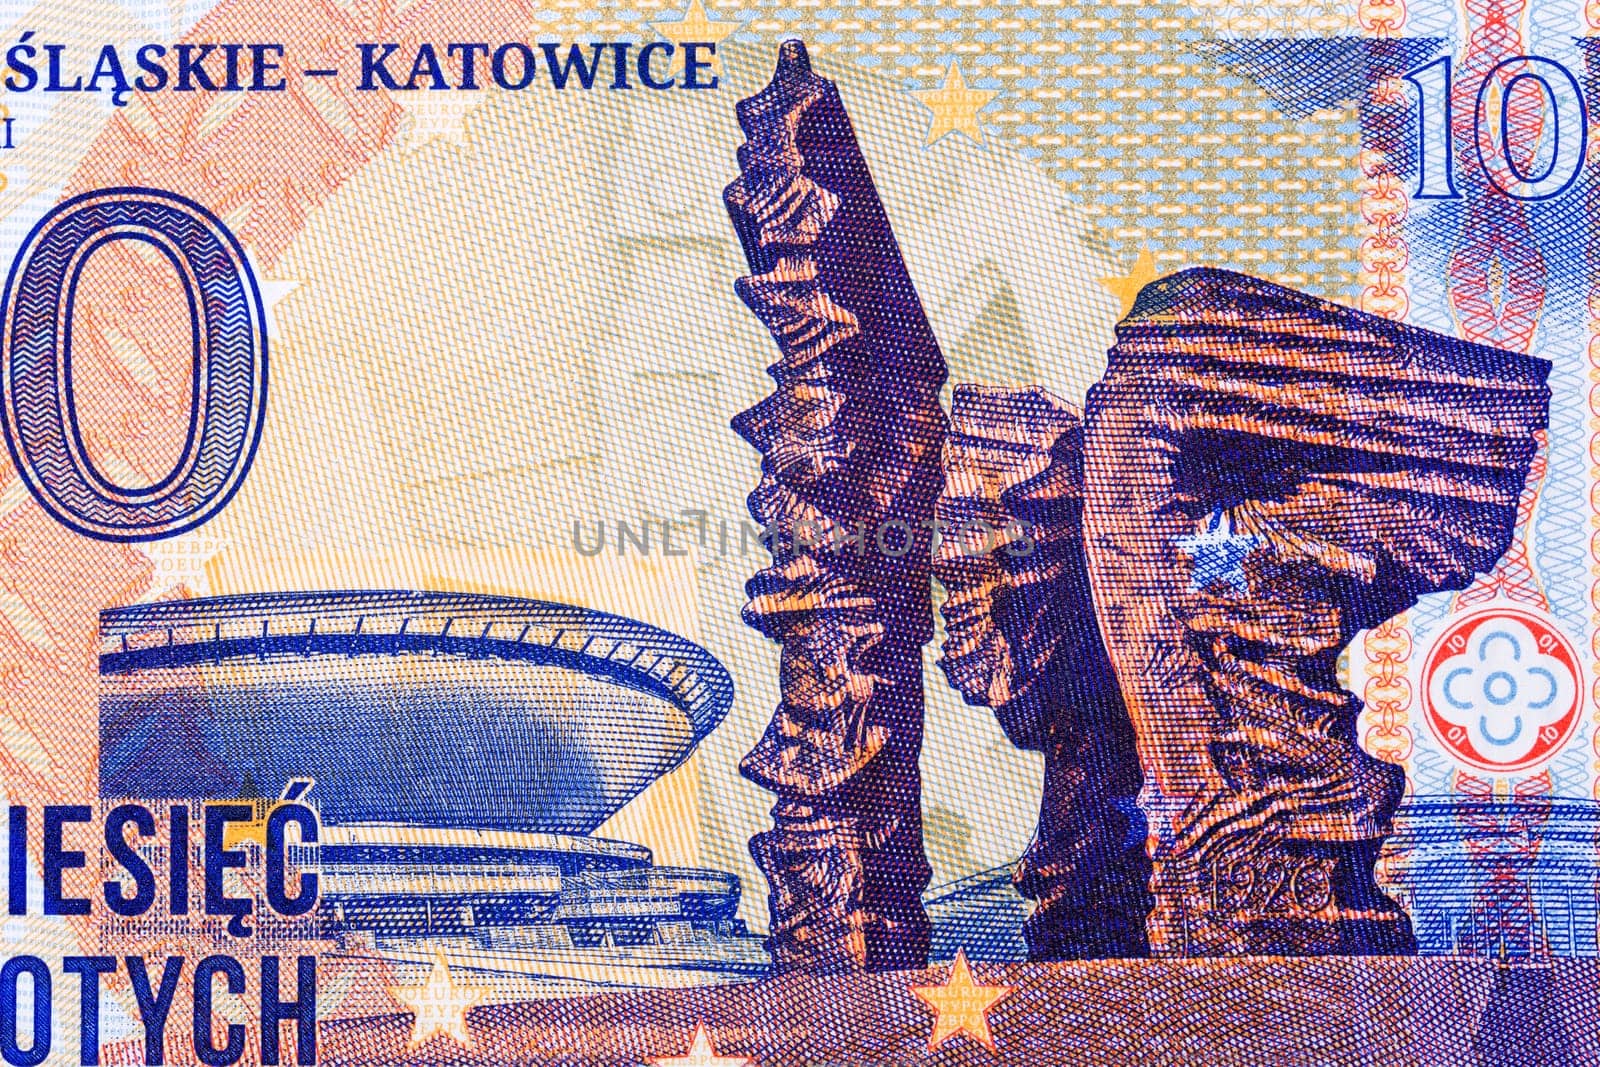 Monument to Silesian insurgents and Saucer in Katowice from money - Polish zloty